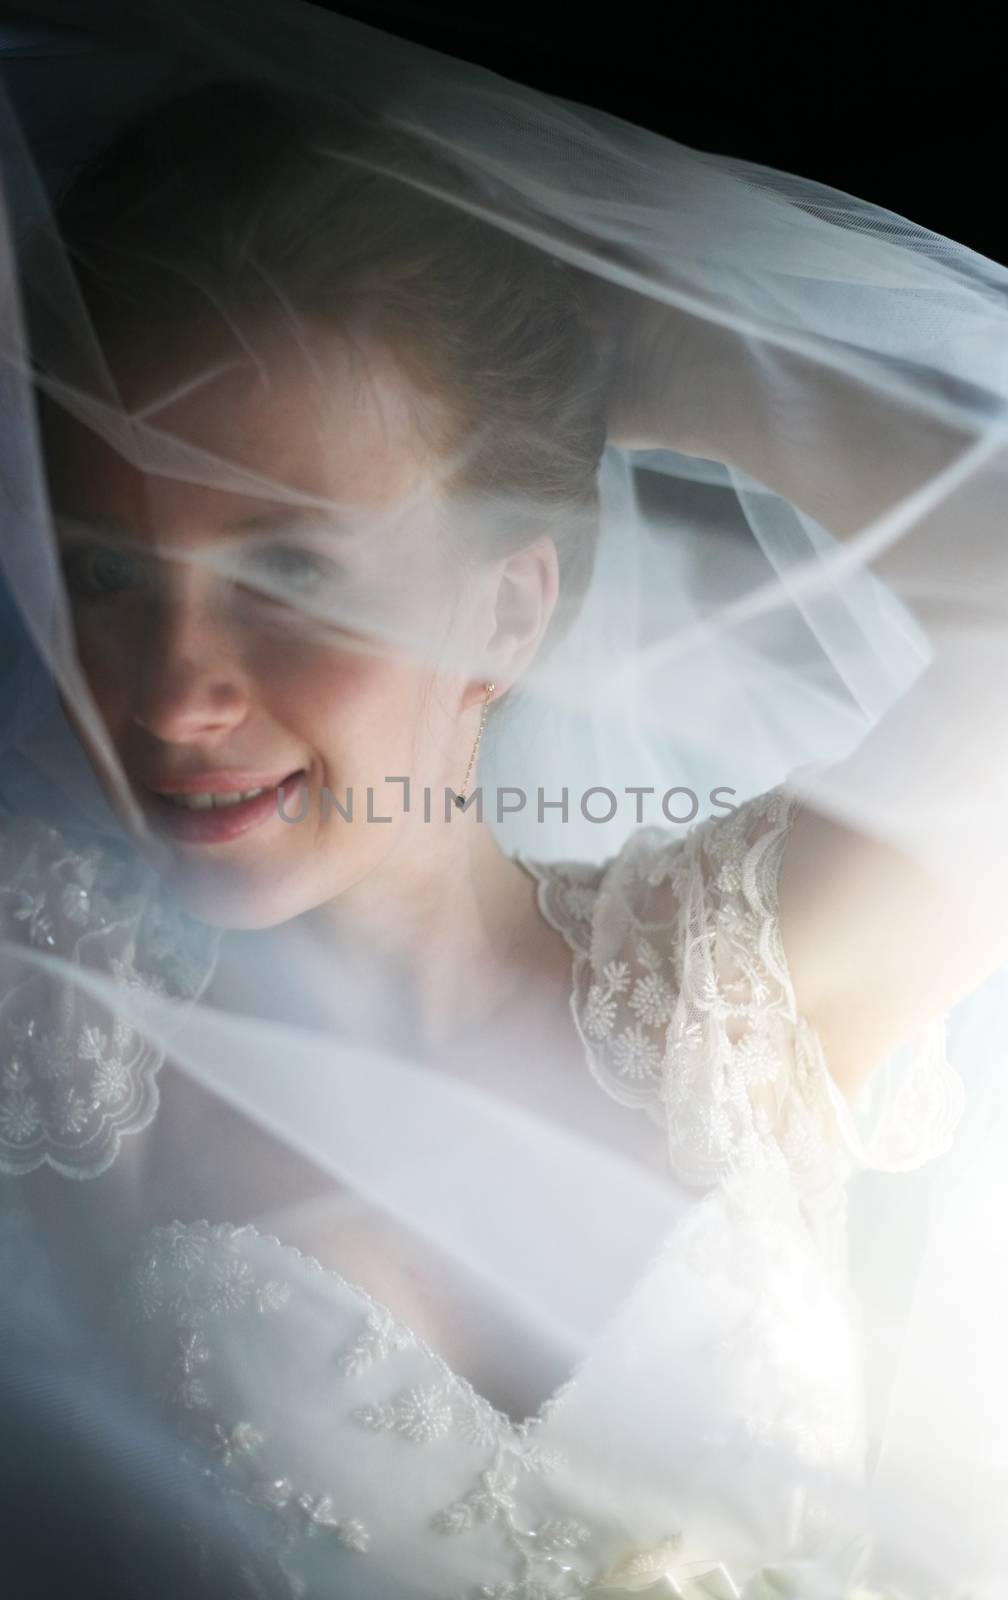 The beautiful bride is closed by a veil